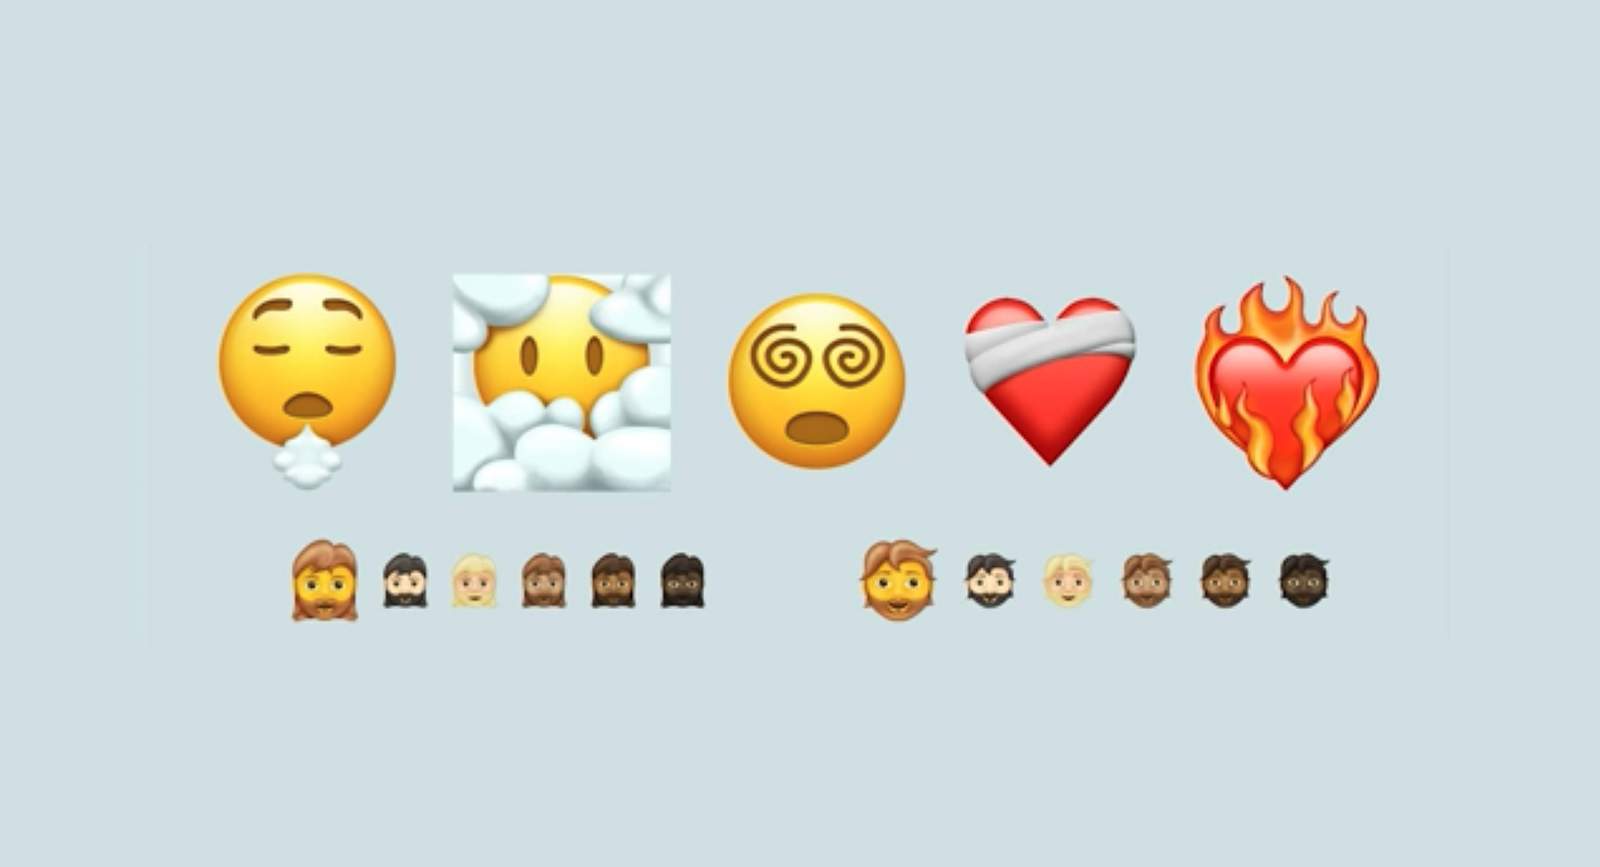 More than 200 new emojis coming in 2021